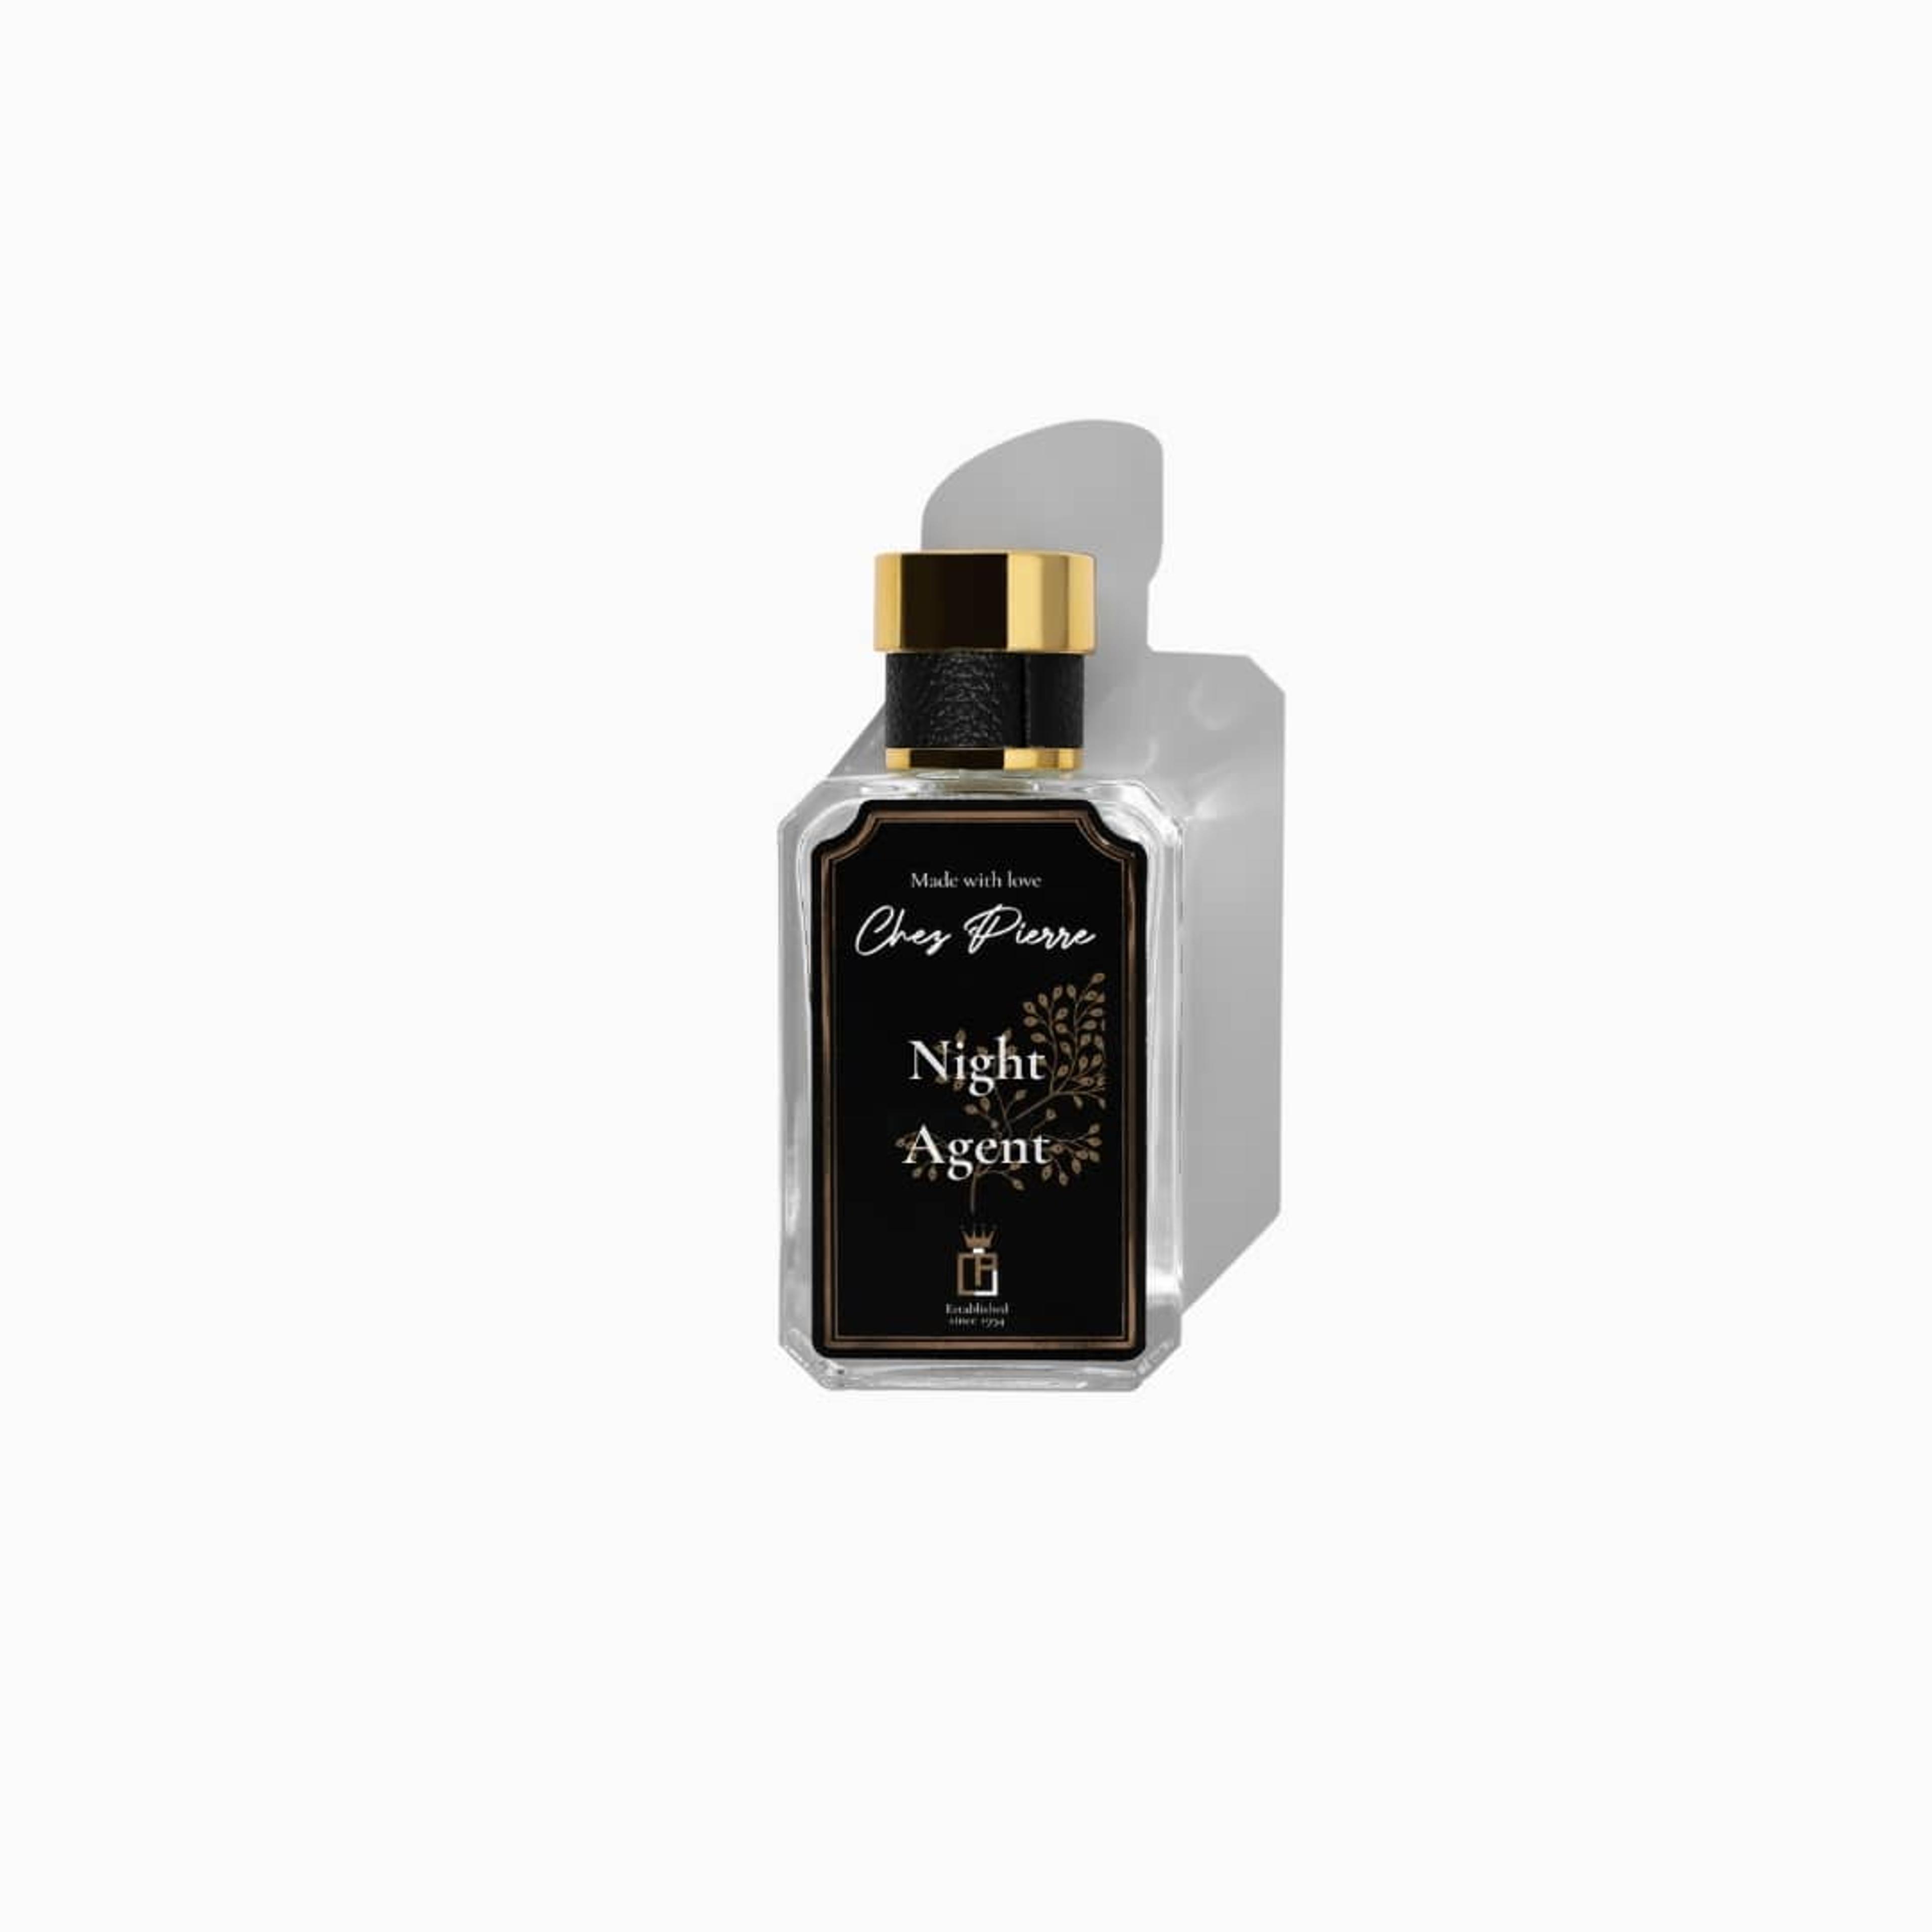 Chez Pierre's Night Agent Perfume Inspired By Spicebomb Night Vision